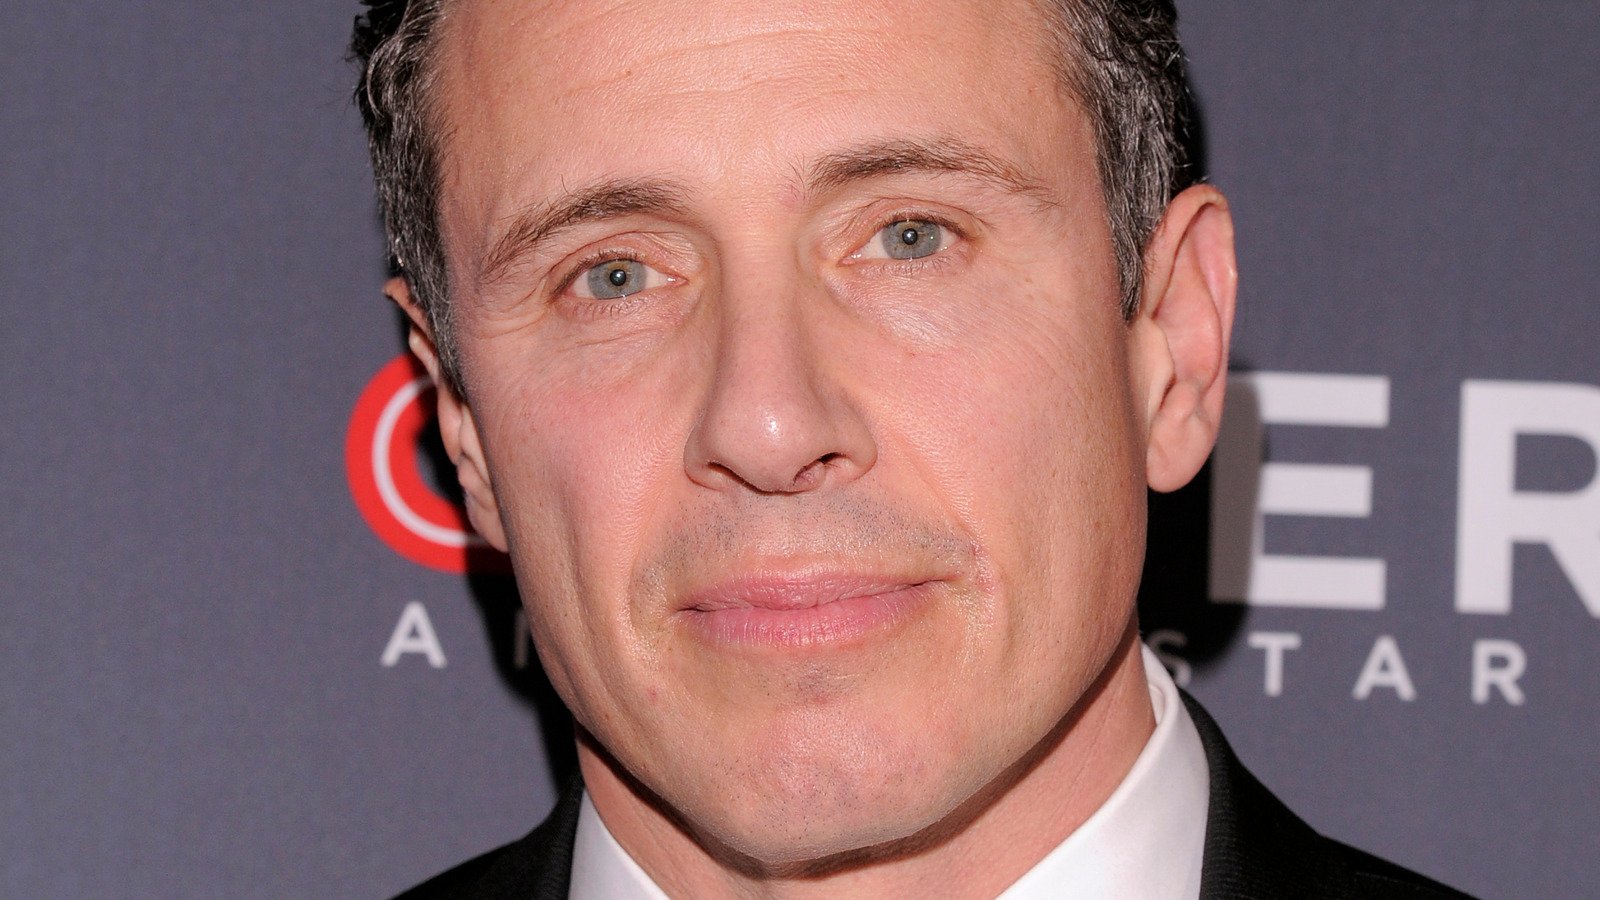 Chris Cuomo's Professional Life Just Took Another Hit